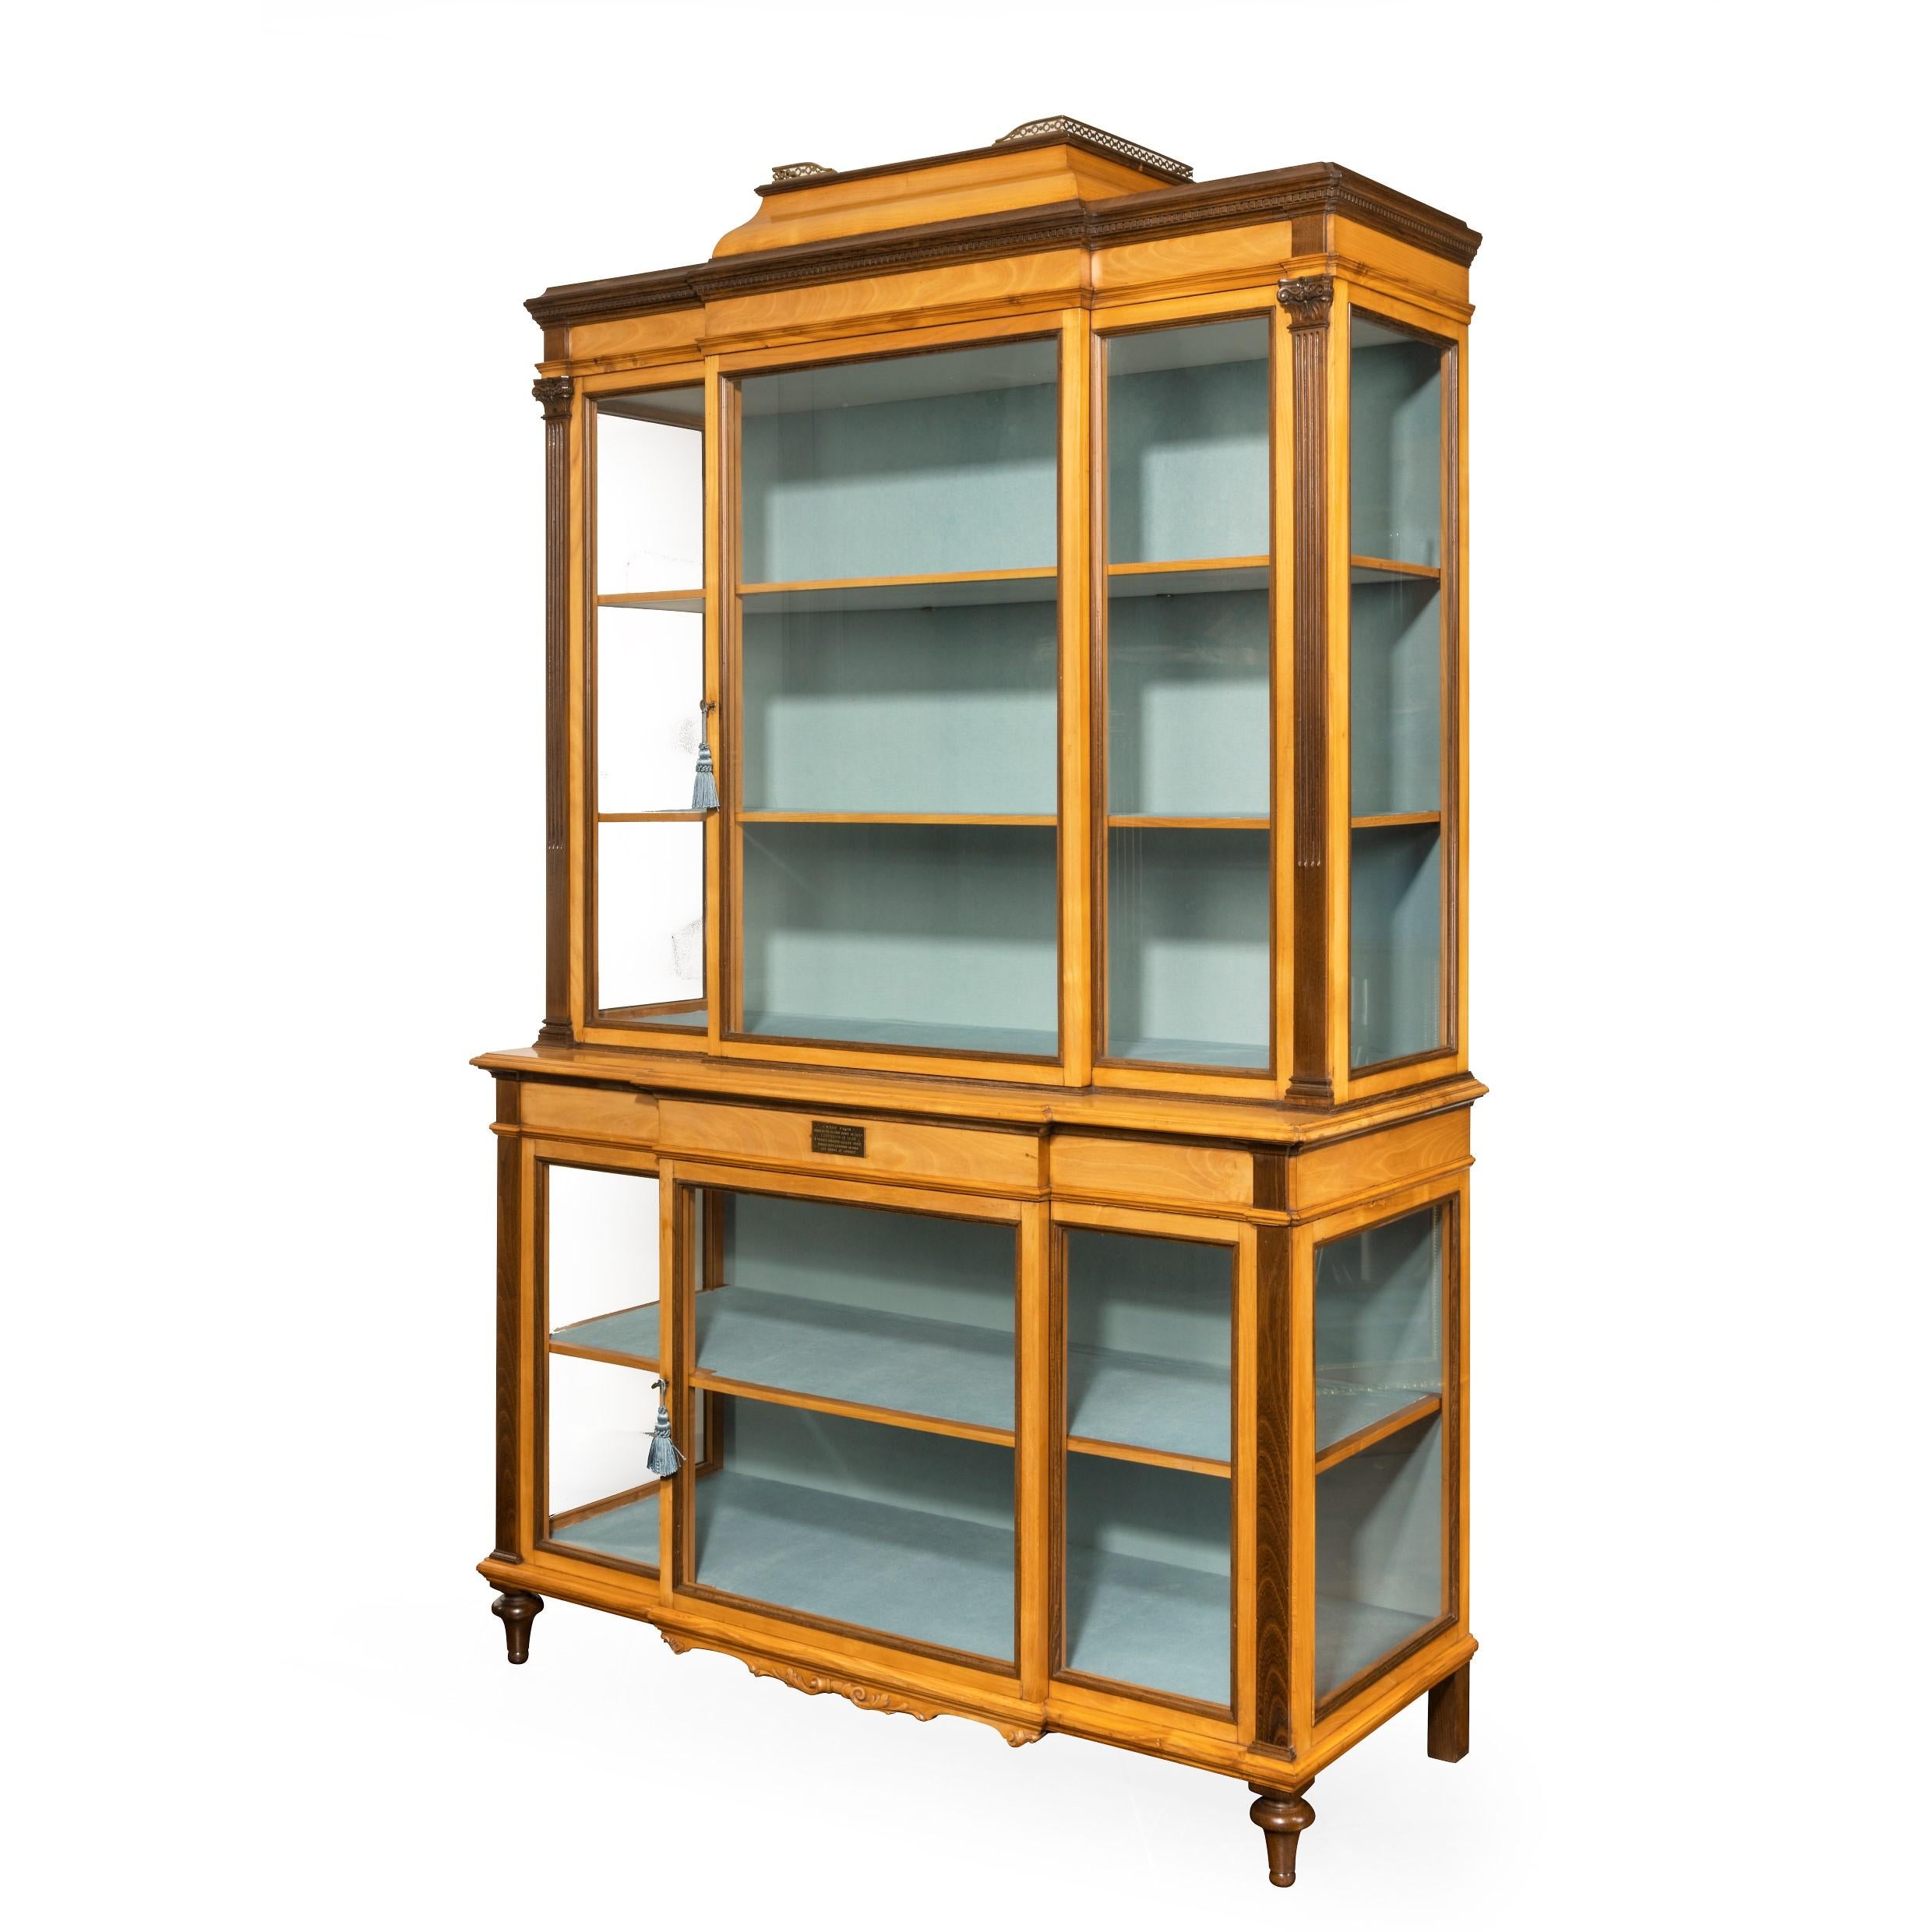 A fine late Victorian Douglas fir, cherry and laburnum display cabinet from Cowden Castle, of glazed breakfront form in two sections, the upper section with a single door and with two shelves with double-re-entrant corners surmounted by a plinth